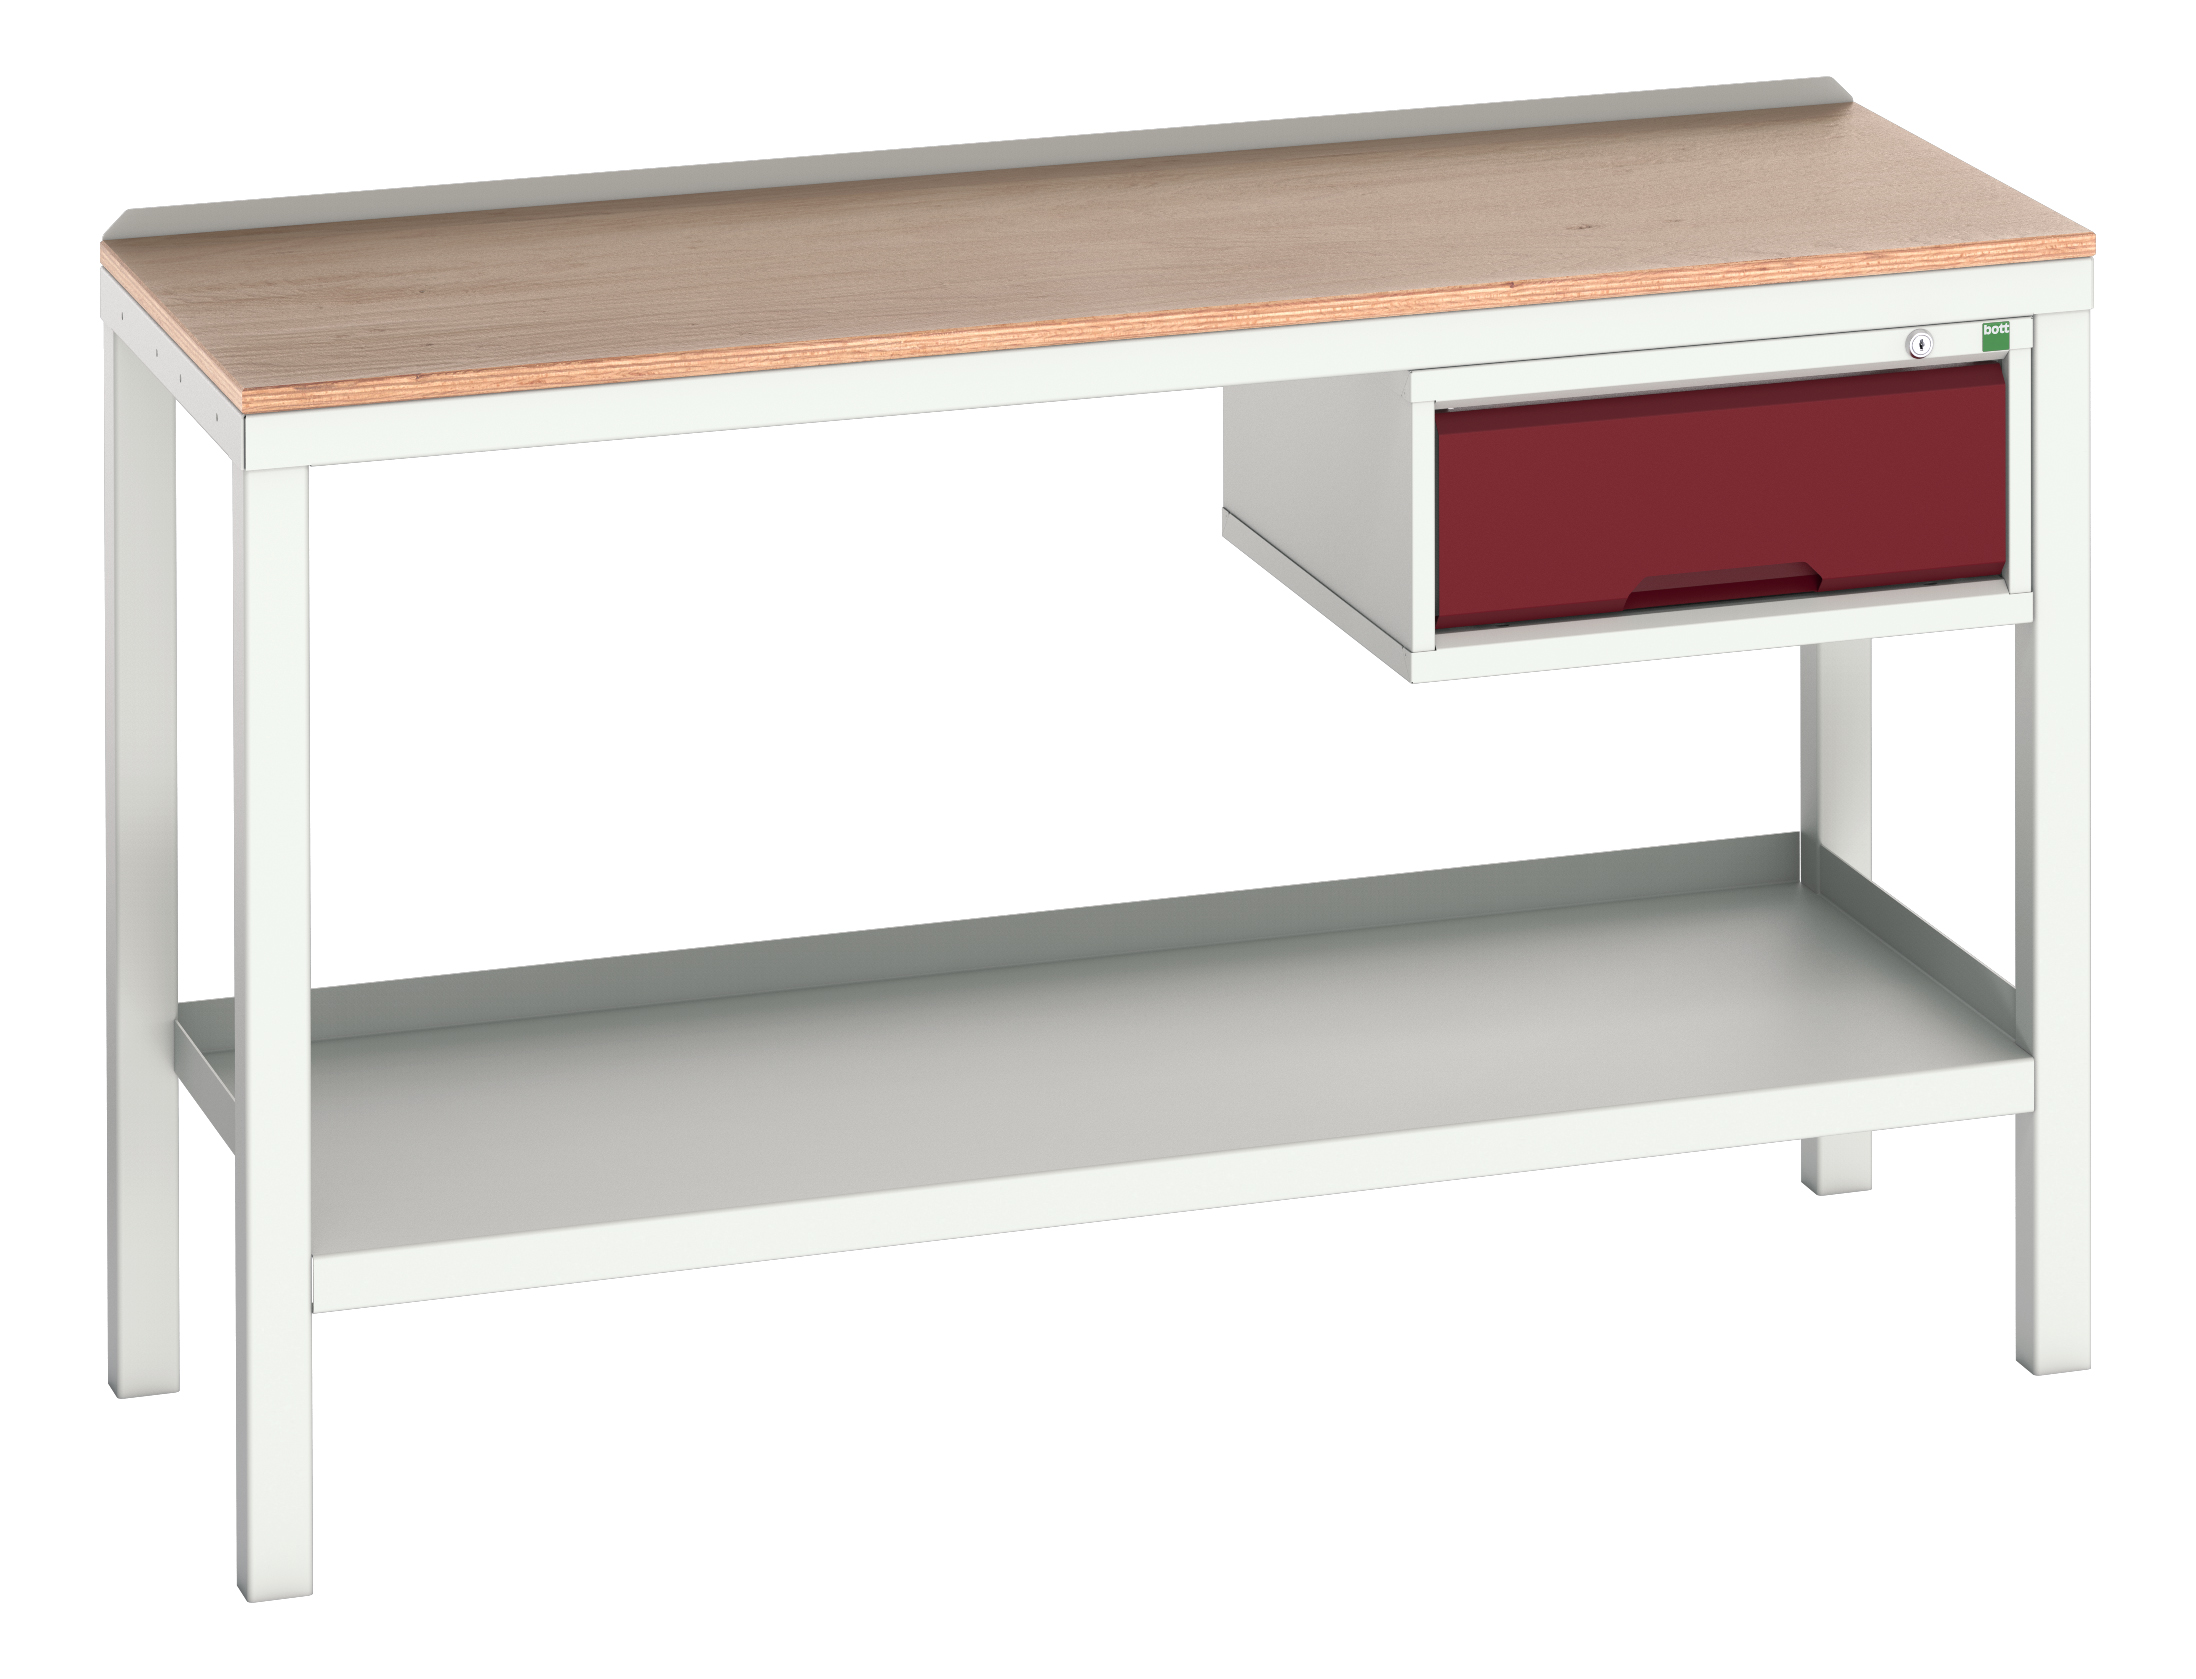 Bott Verso Welded Bench With 1 Drawer Cabinet - 16922605.24